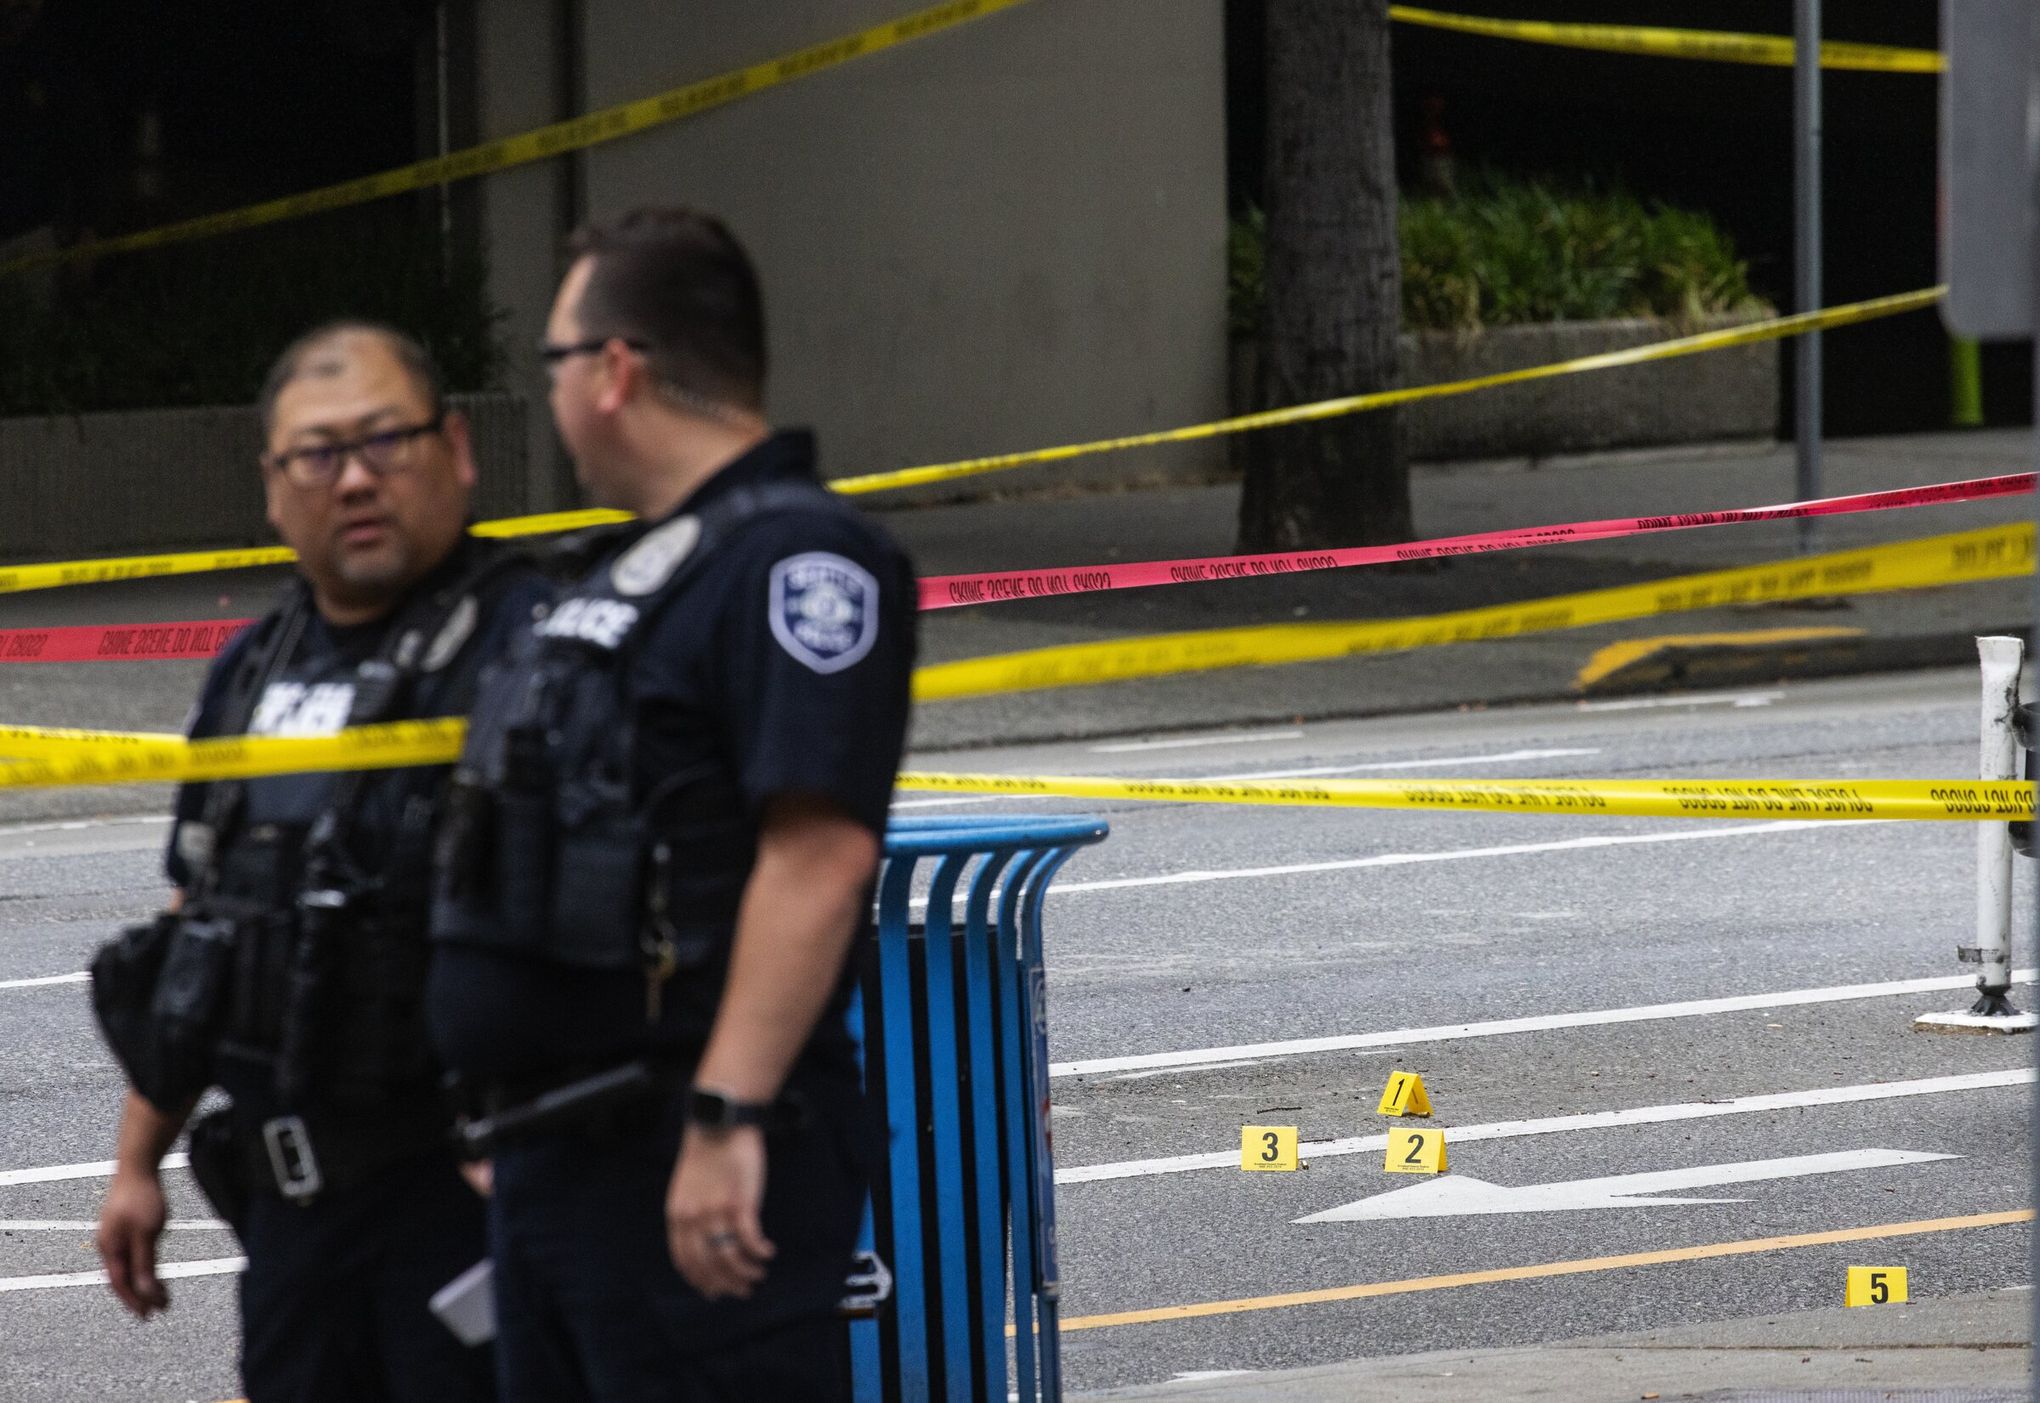 Homicide counts are falling in U.S. cities. In Seattle? Not so much